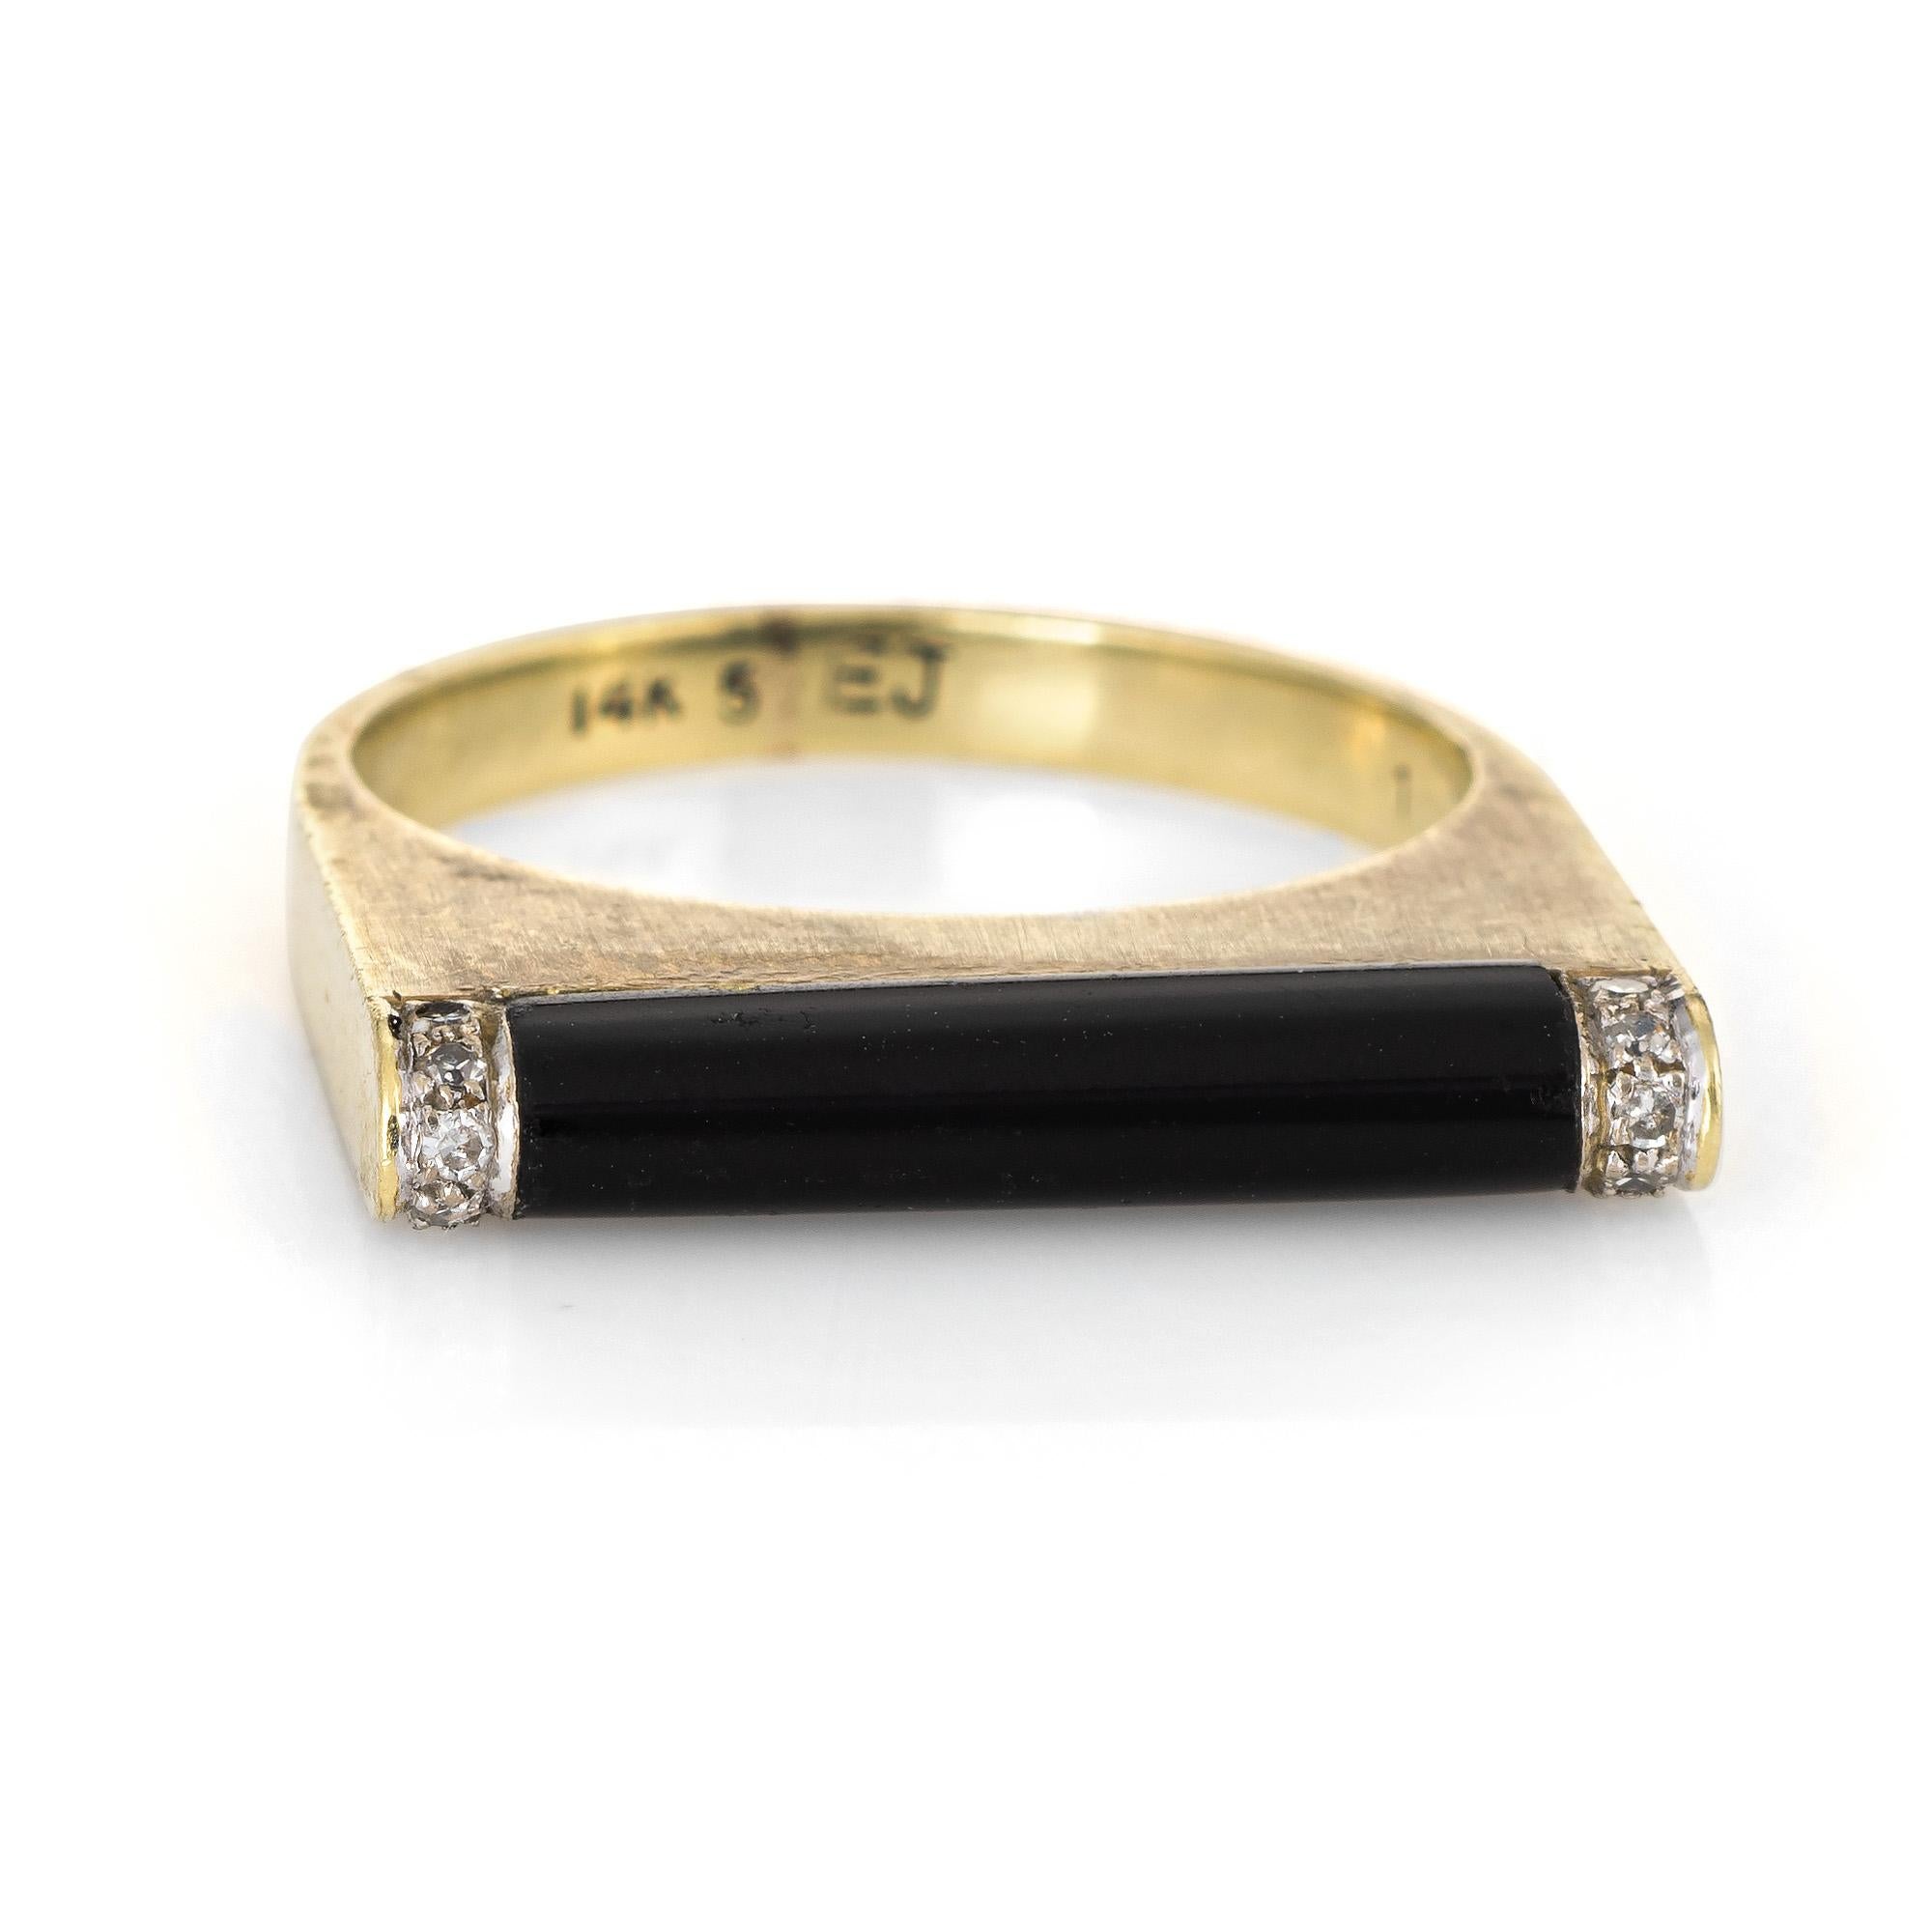 Stylish vintage black onyx & diamond bar ring (circa 1970s) crafted in 14 karat yellow gold. 

Black onyx measures 16mm x 3mm, accented with an estimated 0.05 carats of diamonds (estimated at I-J color and SI1-2 clarity). The onyx is in excellent